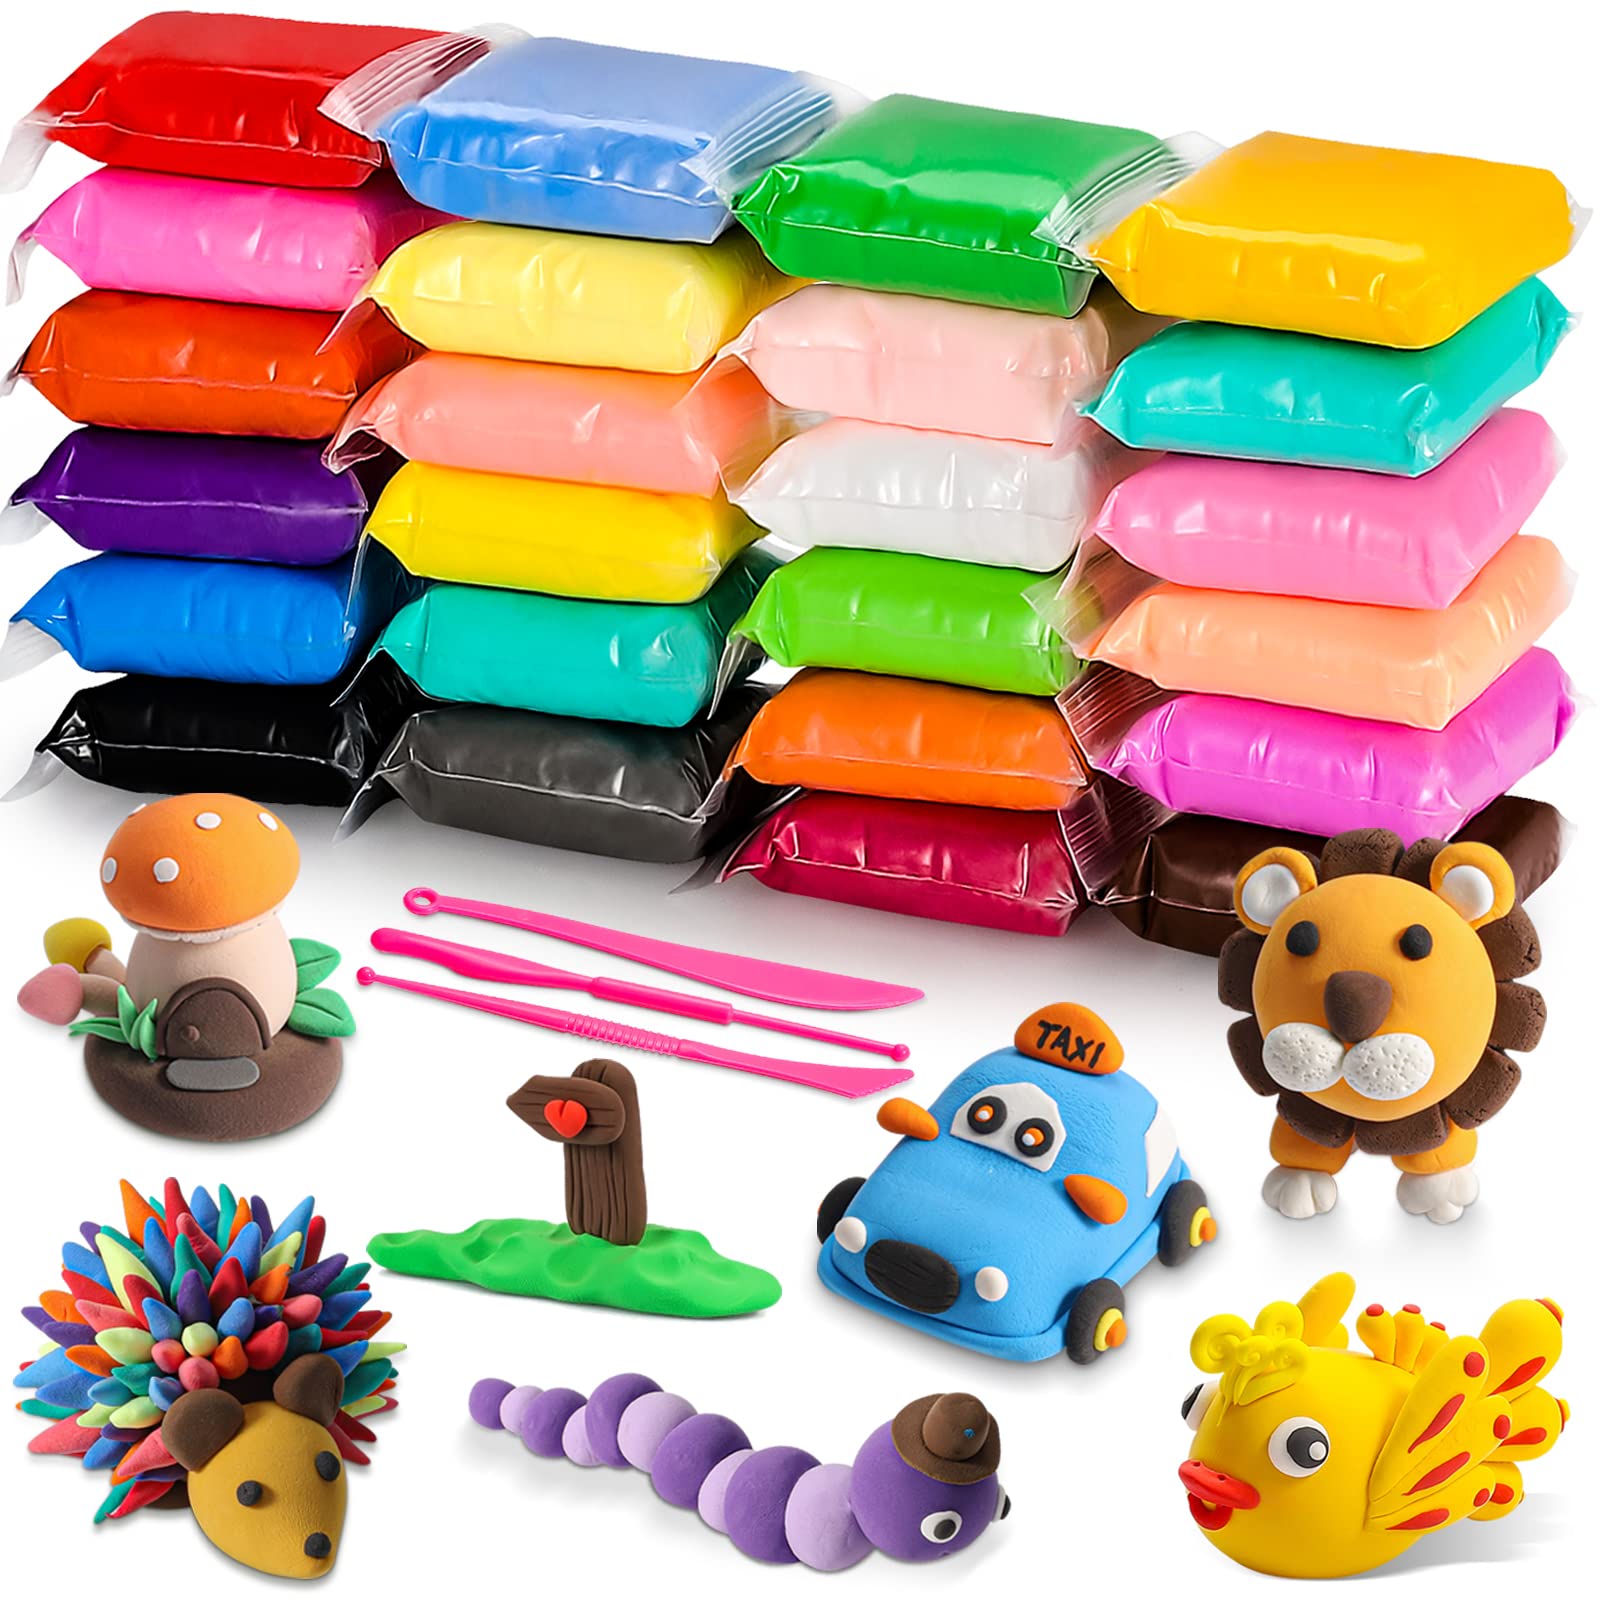 Colorations - Playdough & Molding Clay Accessories for Kids 